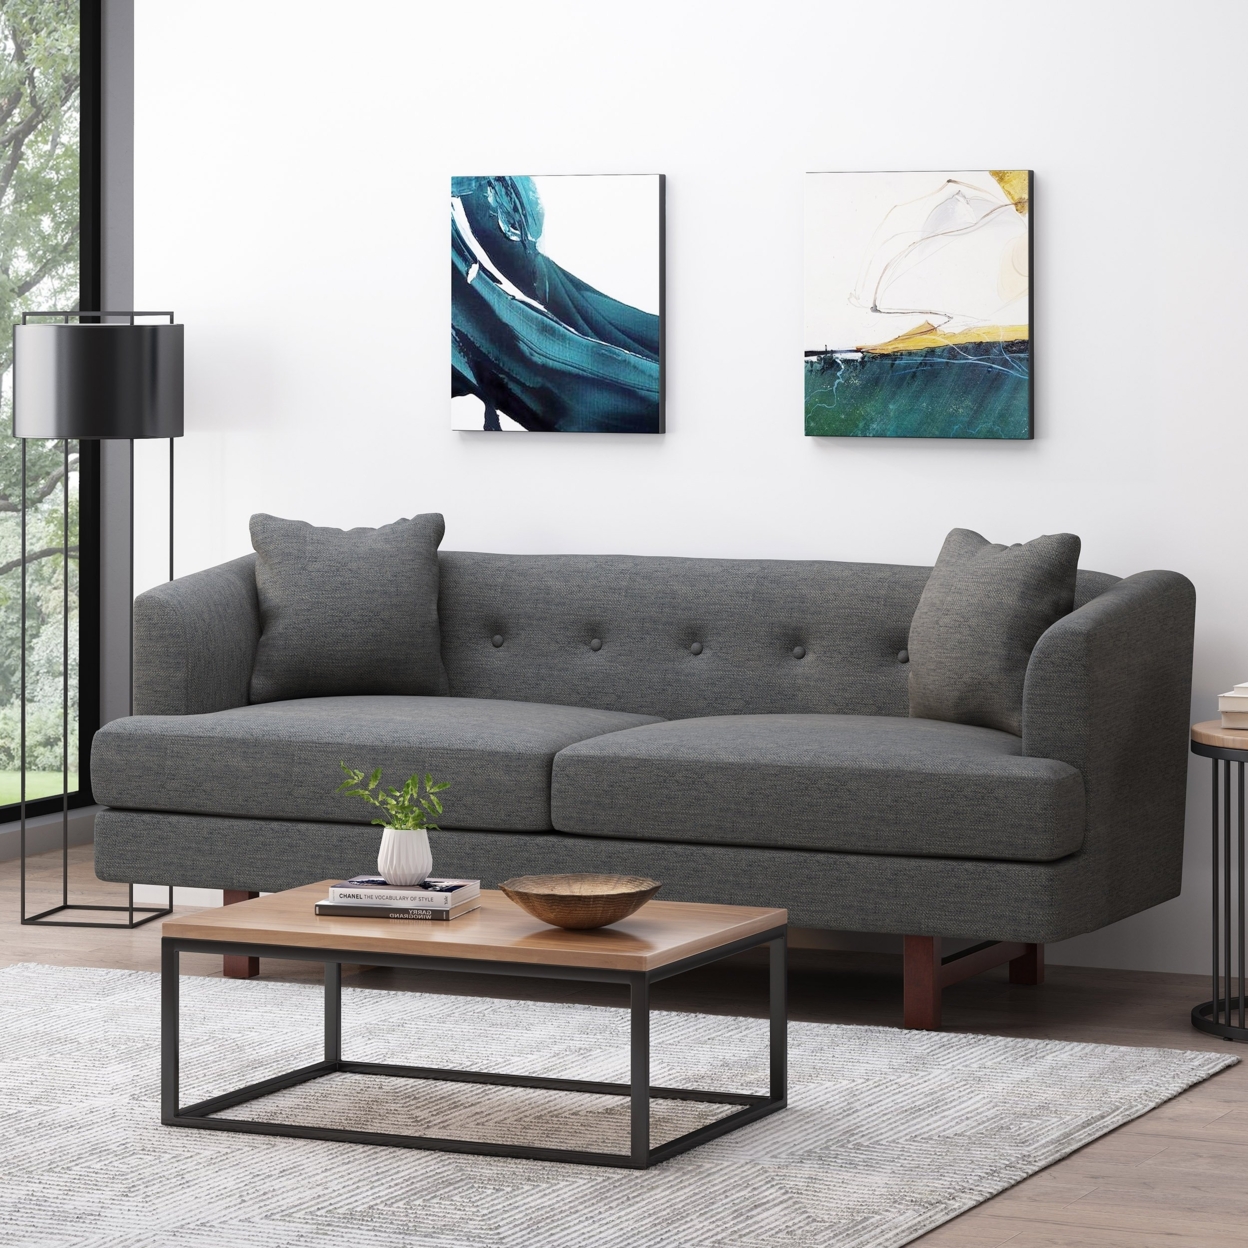 Sparks Mid-Century Modern Upholstered 3 Seater Sofa - Espresso/charcoal